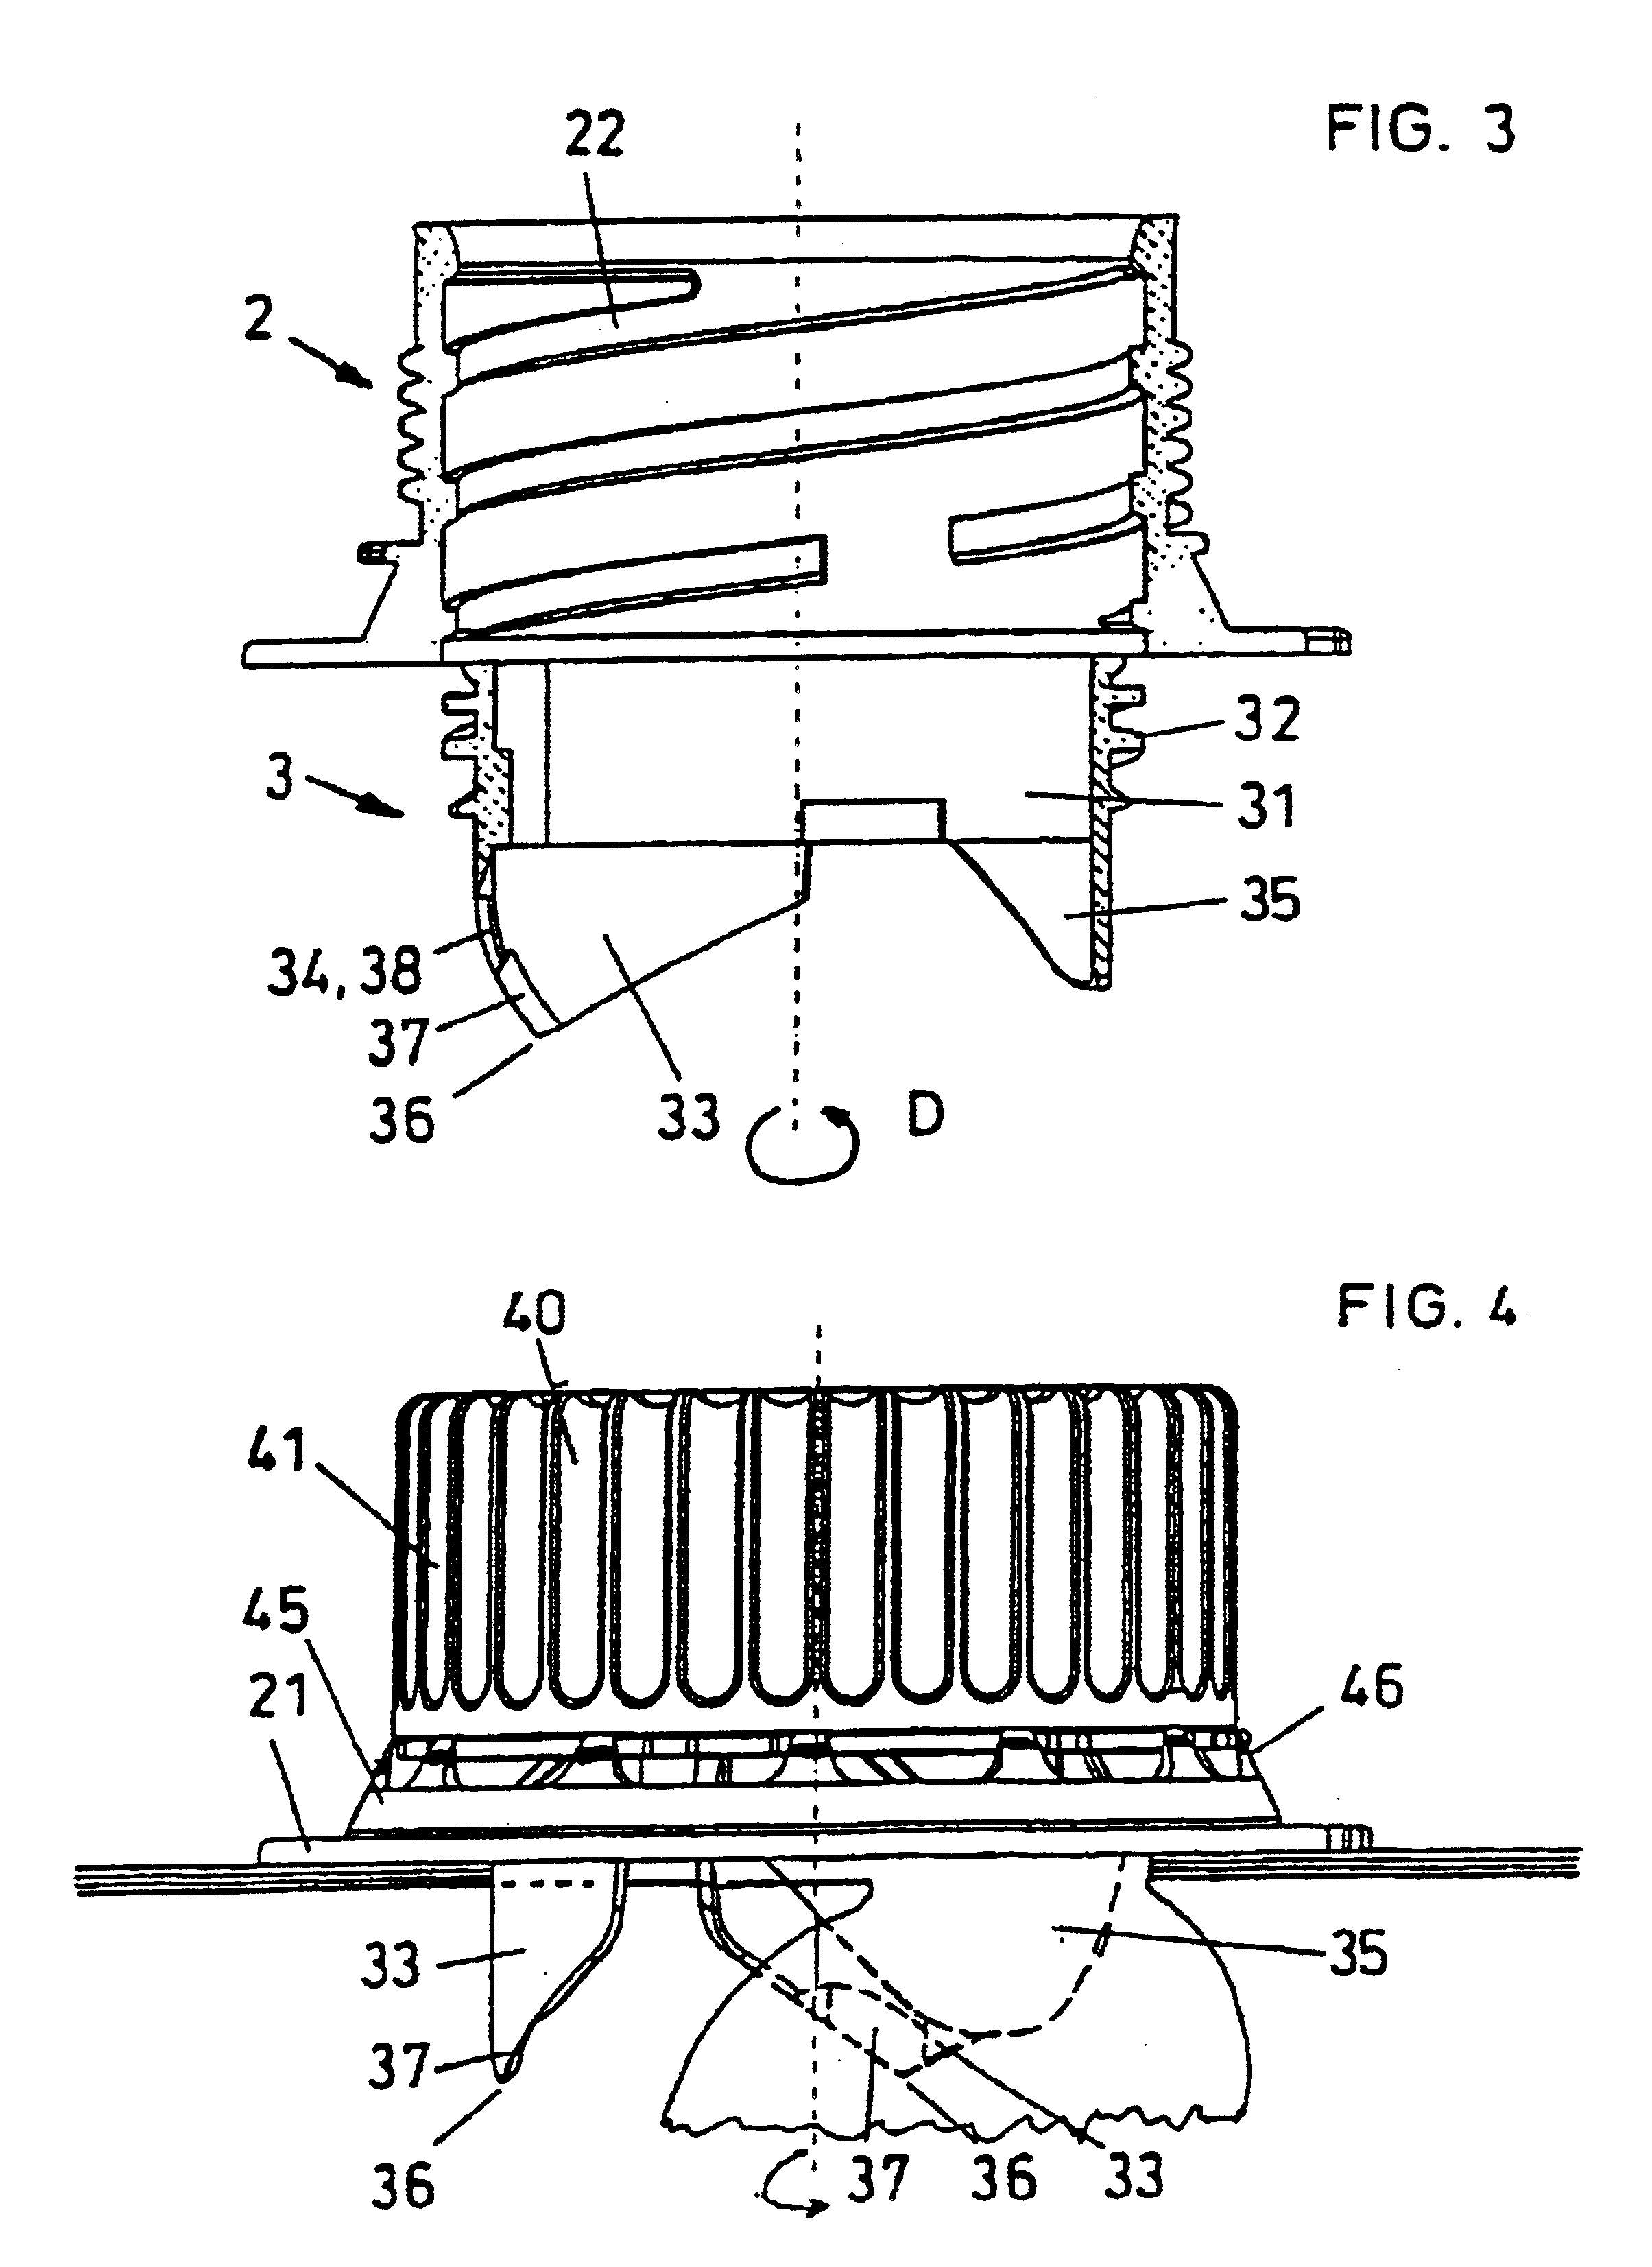 Closing device with a piercing element